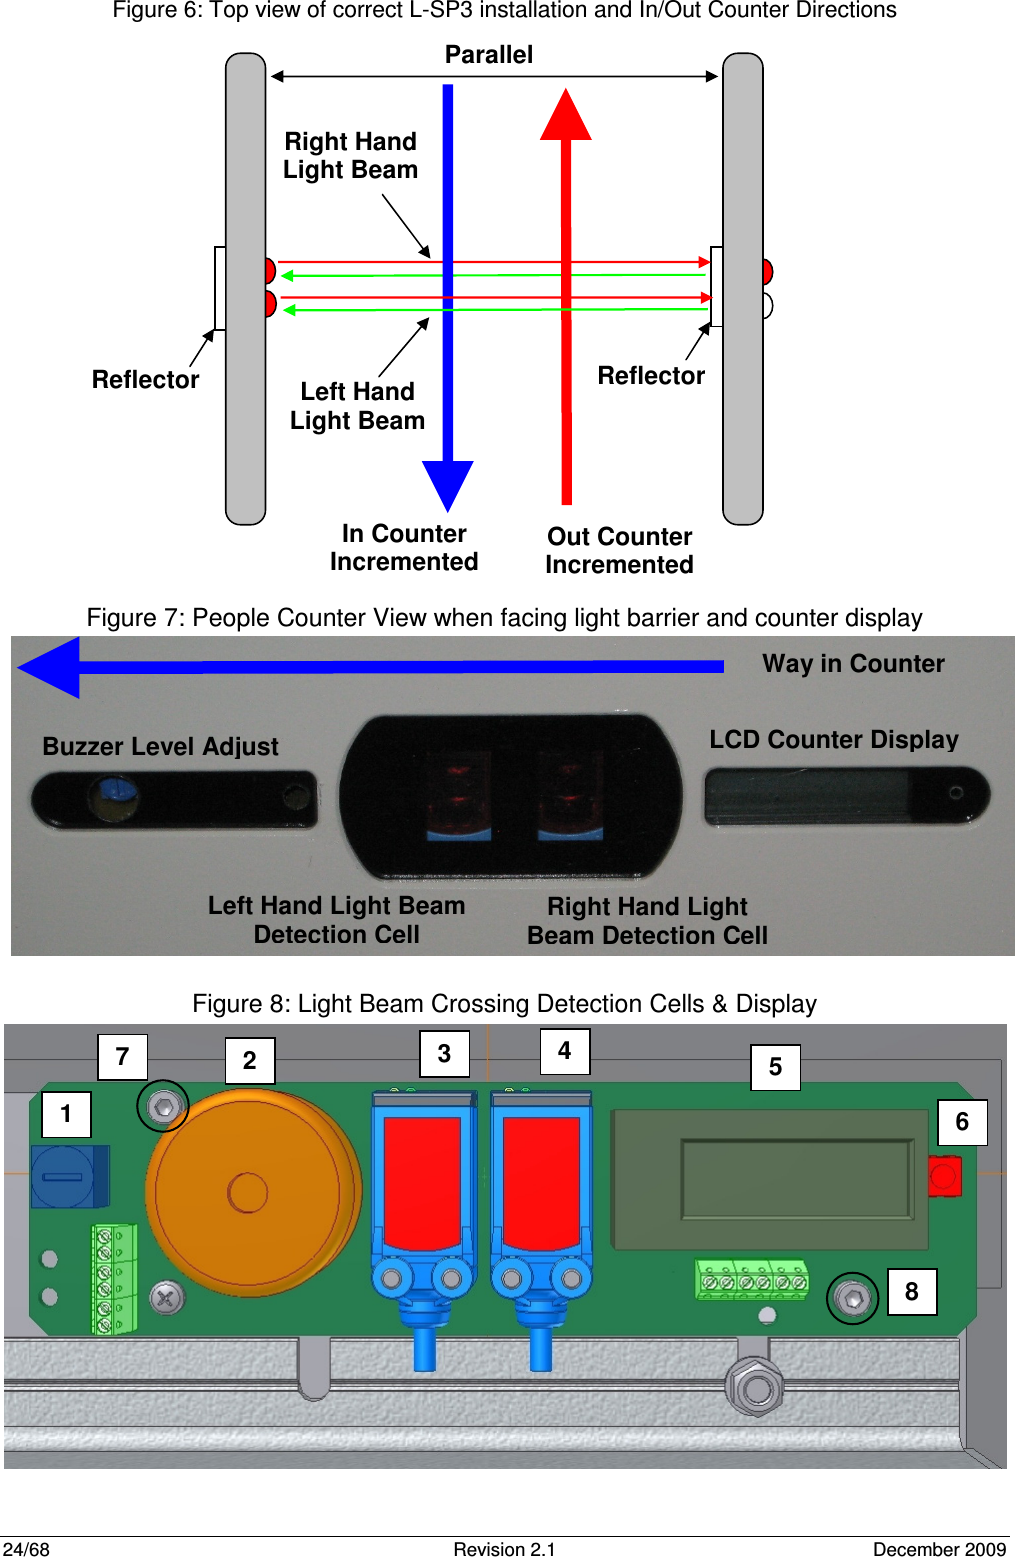  24/68  Revision 2.1  December 2009 Figure 6: Top view of correct L-SP3 installation and In/Out Counter Directions                Figure 7: People Counter View when facing light barrier and counter display             Figure 8: Light Beam Crossing Detection Cells &amp; Display                Way in Counter Left Hand Light Beam Detection Cell Right Hand Light Beam Detection Cell LCD Counter Display Buzzer Level Adjust Right Hand Light Beam Reflector Parallel Reflector Left Hand Light Beam In Counter Incremented Out Counter Incremented  1  2  3  4  5  6  7  8  